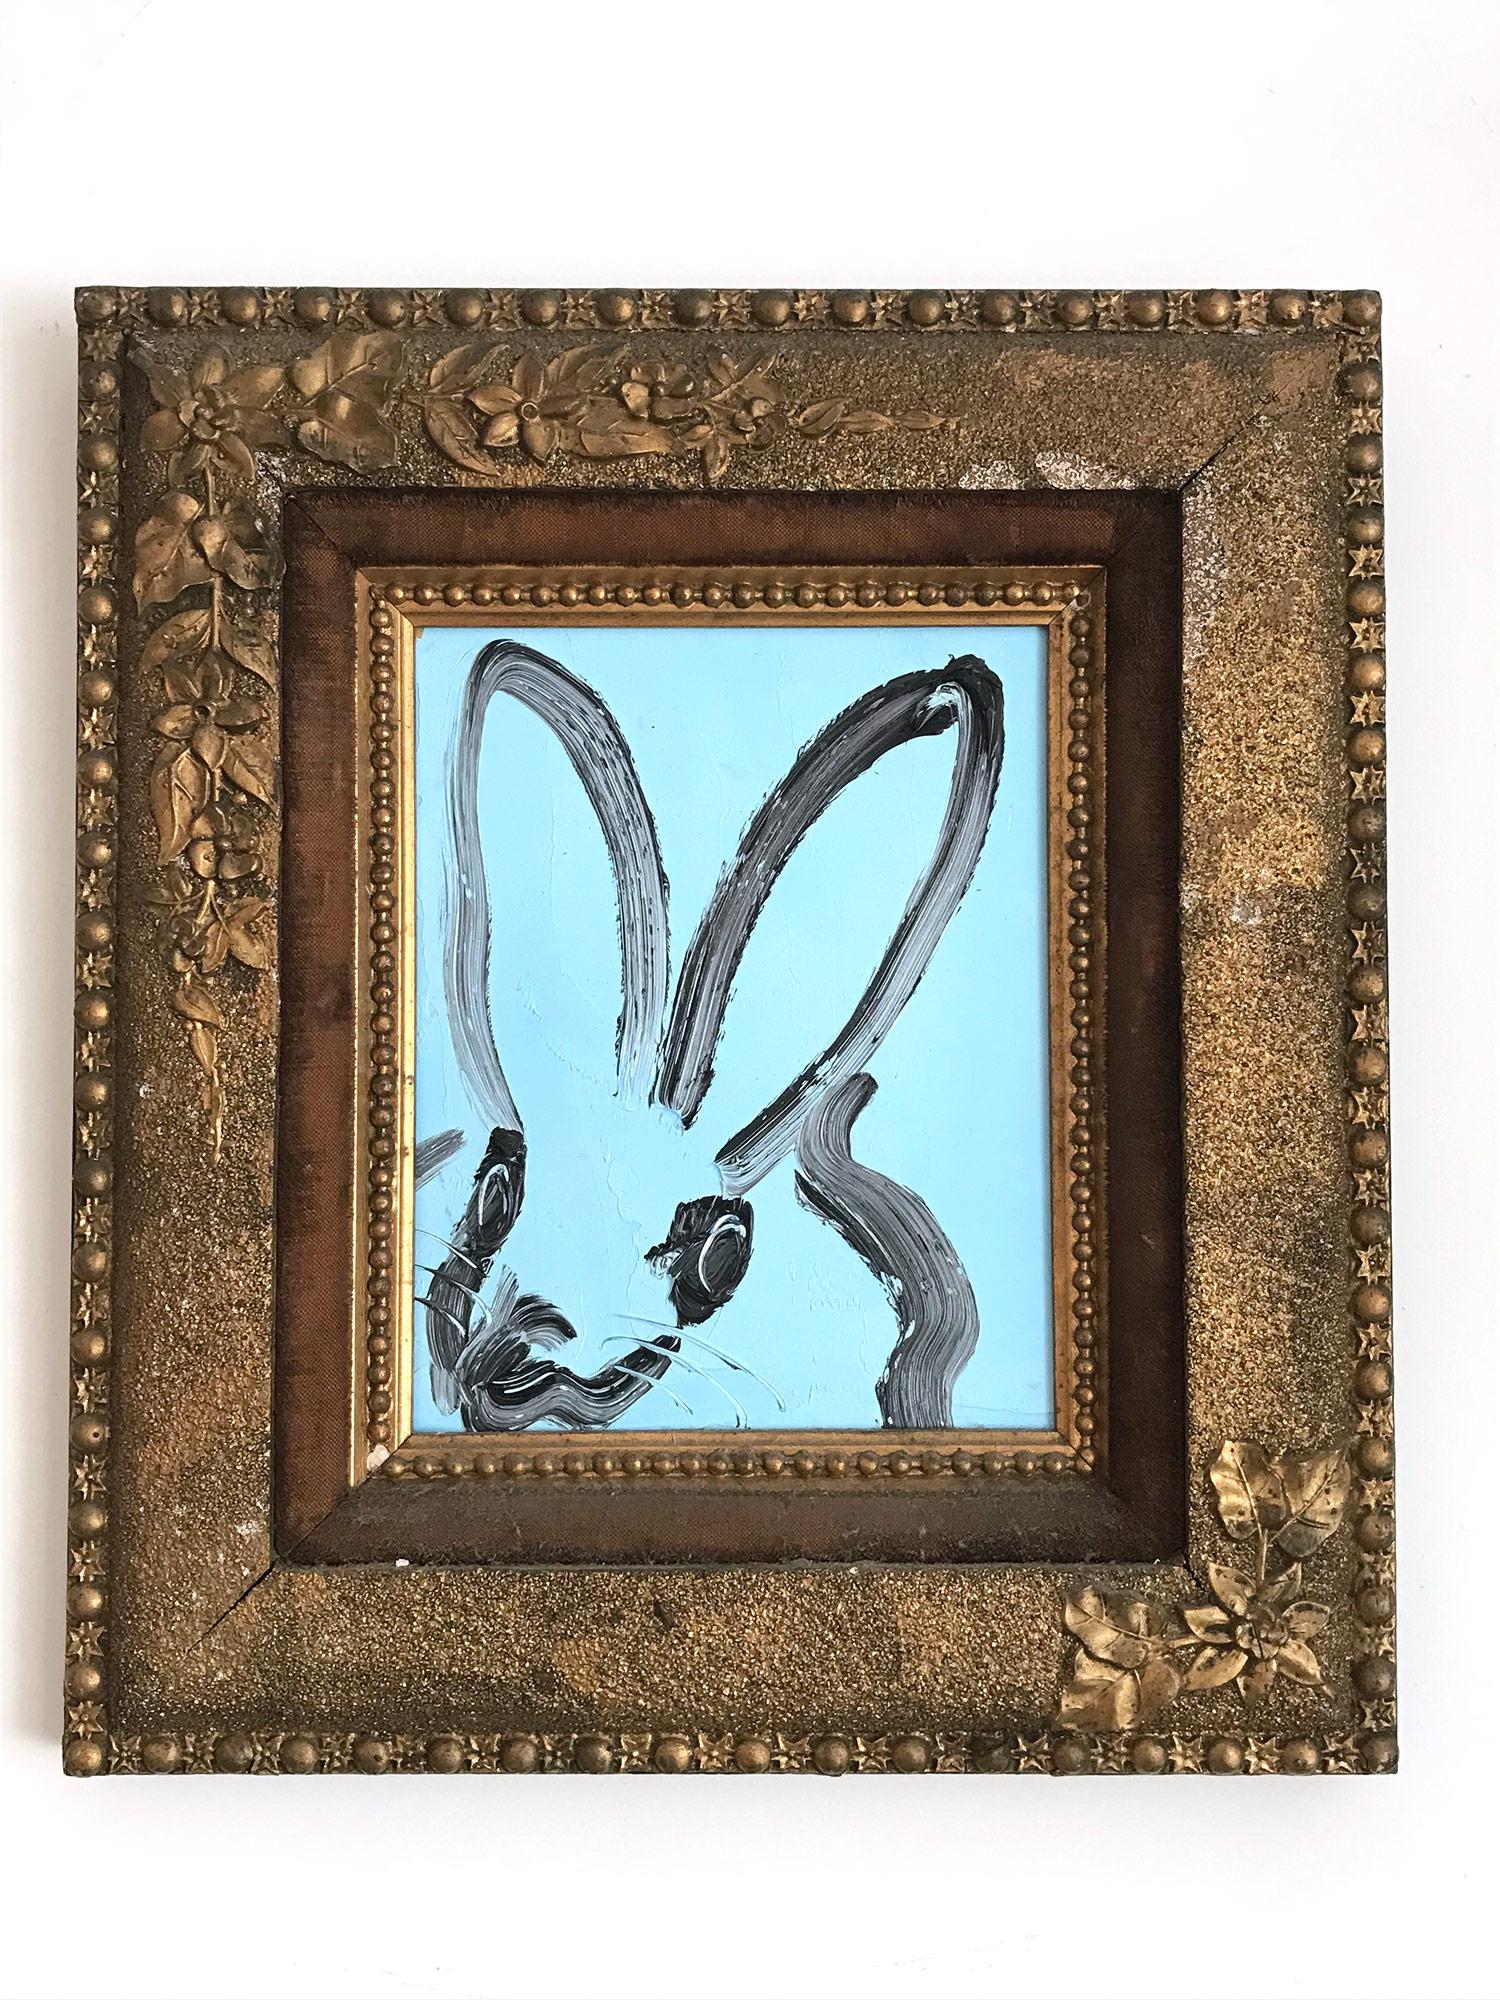 A wonderful composition of one of Slonem's most iconic subjects, Bunnies. This piece depicts a gestural figure of a black bunny on a blue background with thick use of paint. It is housed in a wonderful antique 19th Century frame. Inspired by nature